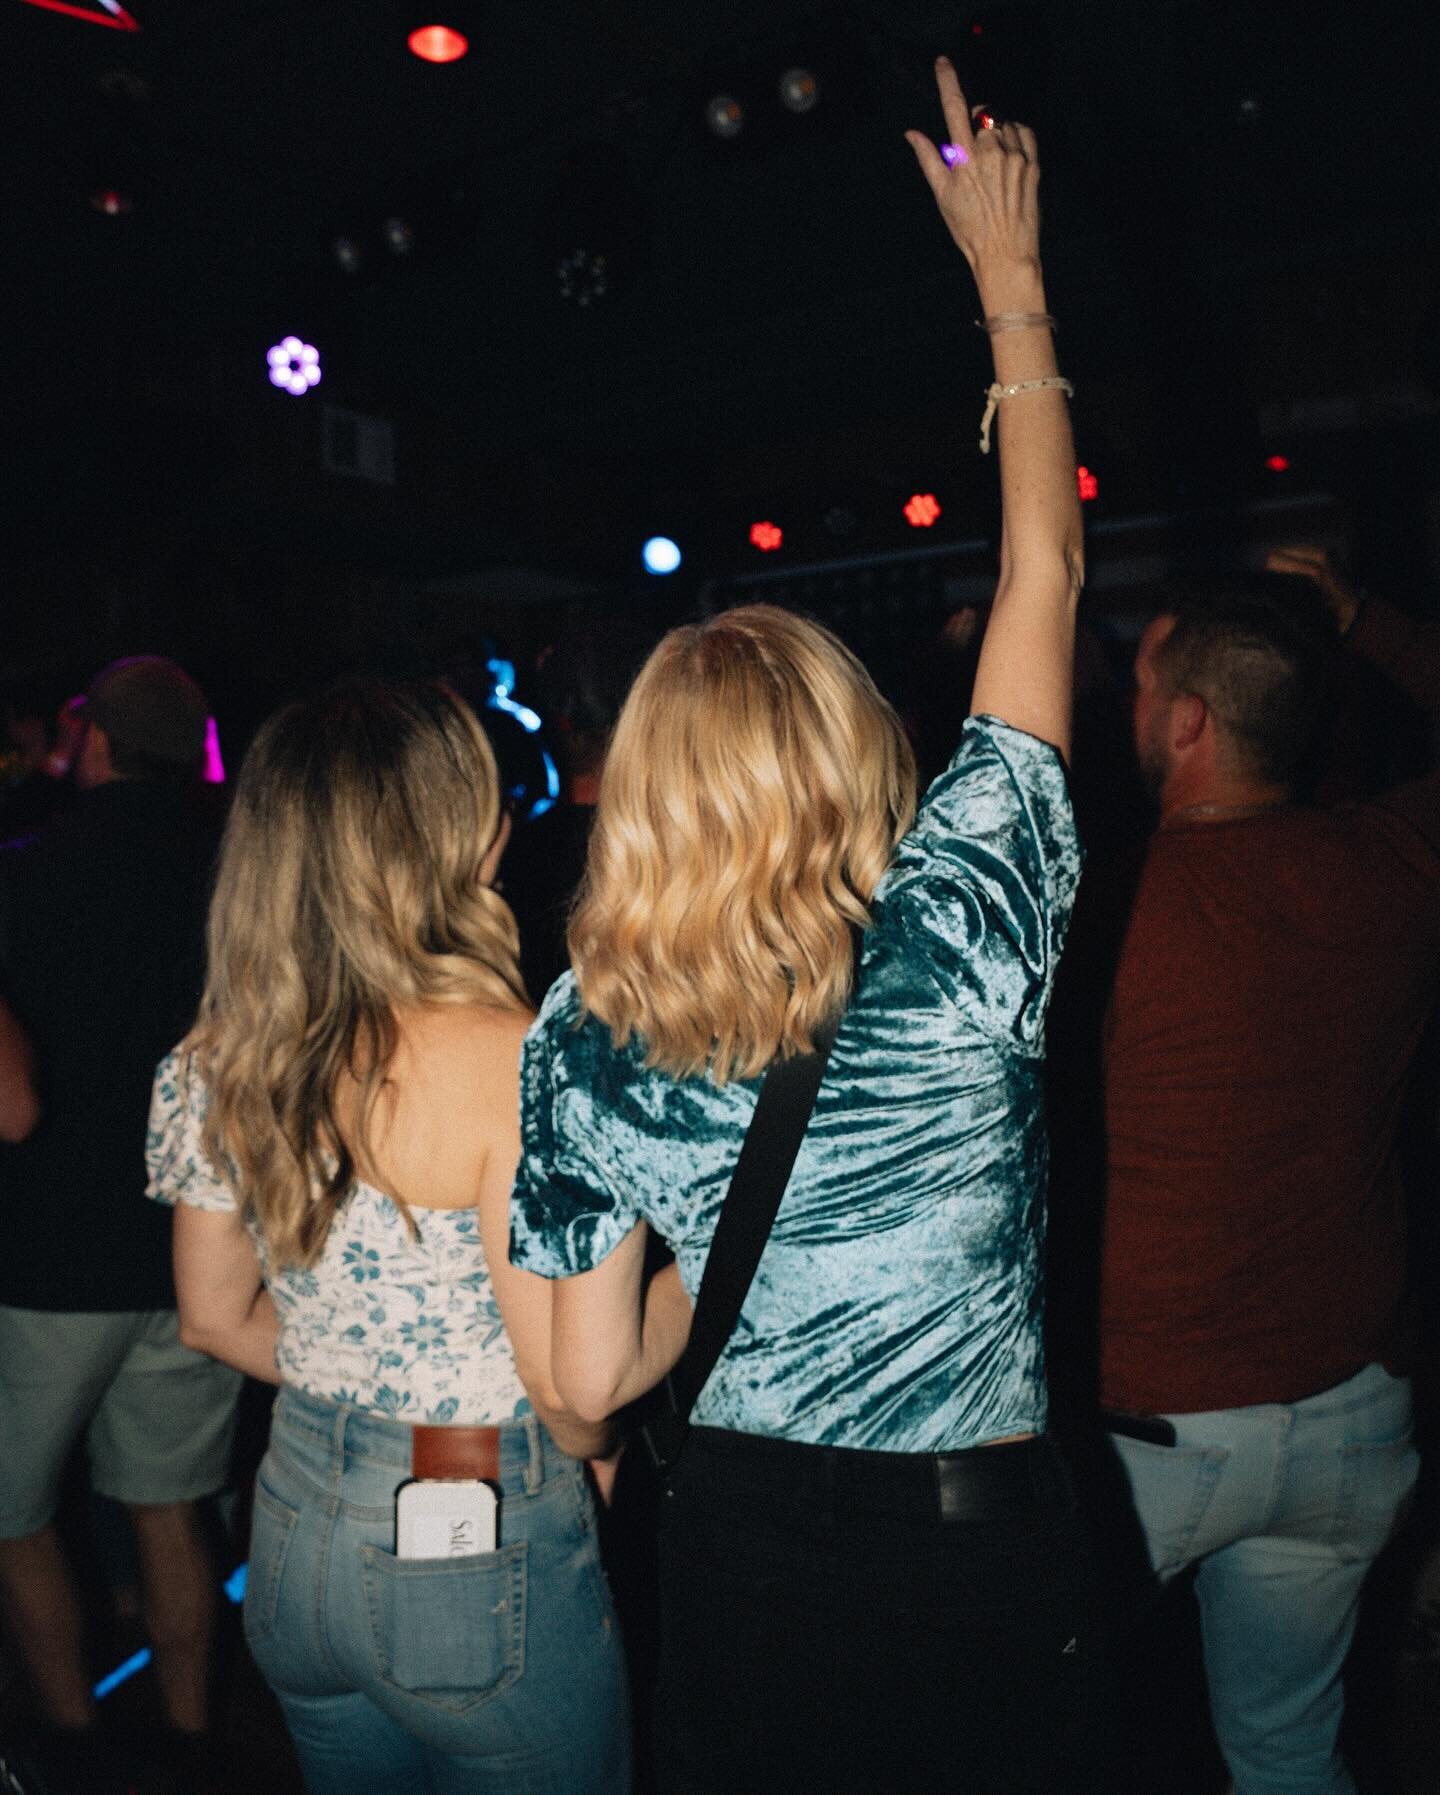 Grab your spot early - tonight&rsquo;s going to be a party. 

Our doors are open now! Live music starting at 5 with @mattbillor_music @king_kyote and @kyledillsofficial 🎸

From the ship to the Farm, we&rsquo;ll be partying all night with special Gas